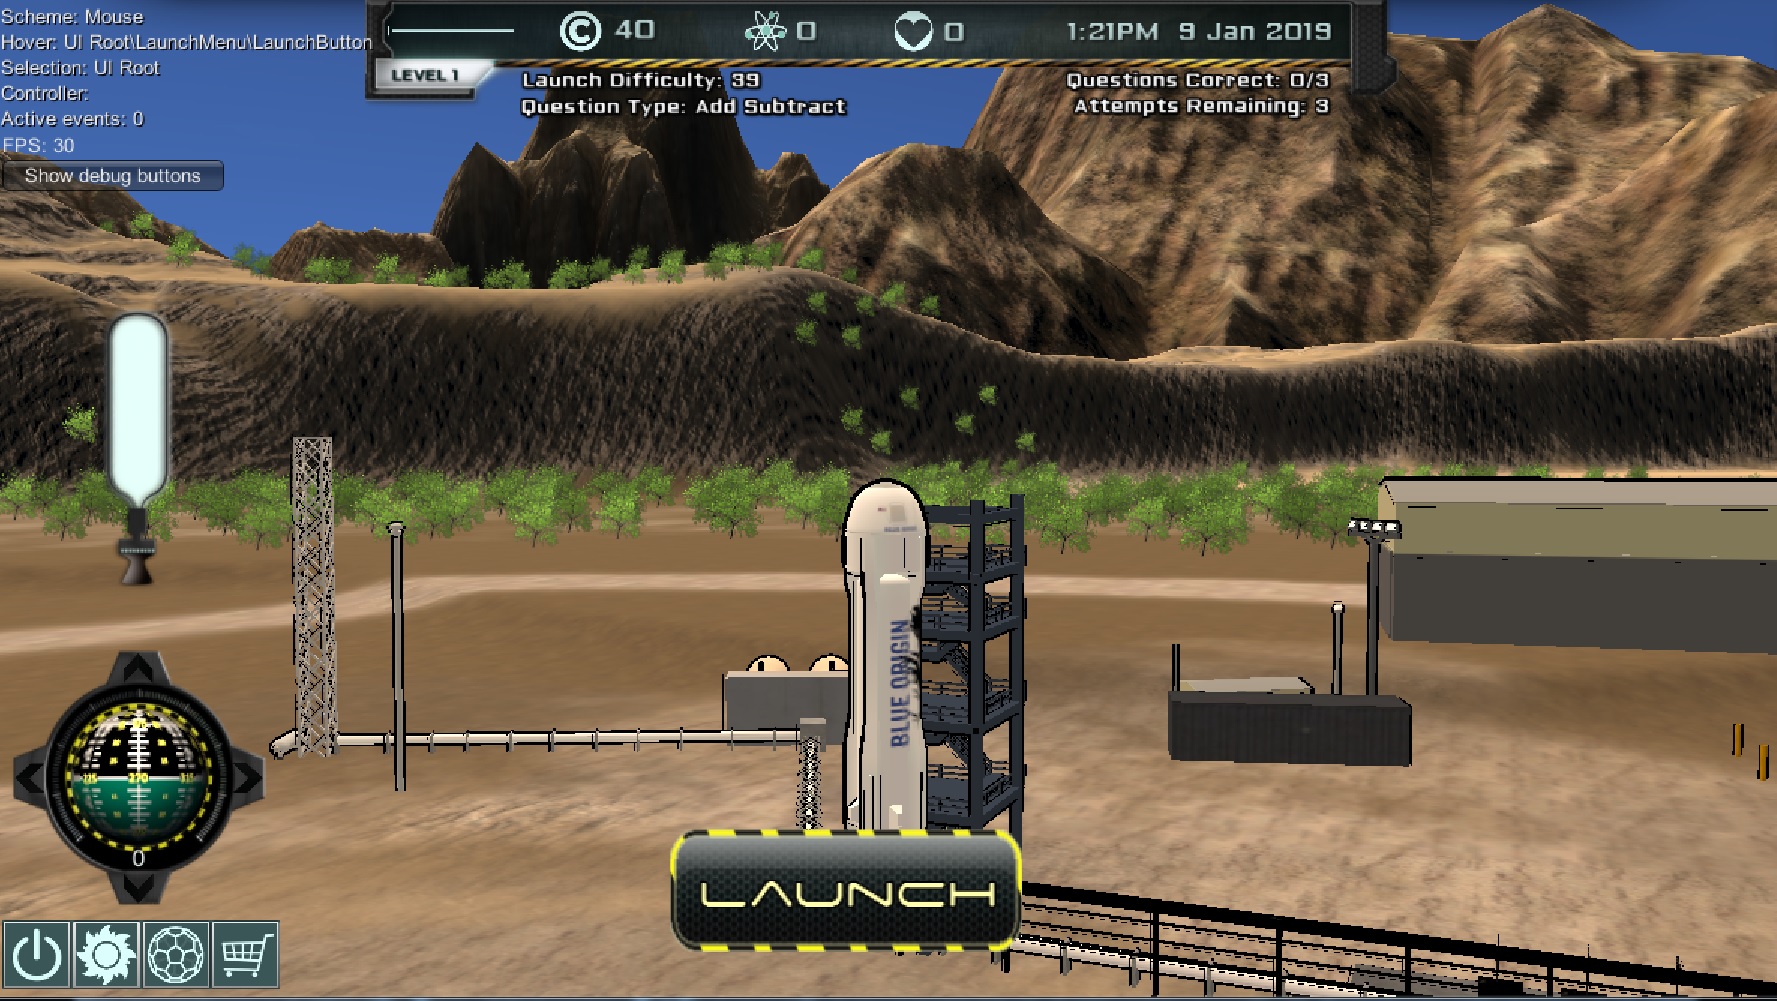 Intergalactic Education Blue Origin New Shepard launch e learning gameplay aligned to Common Core standards